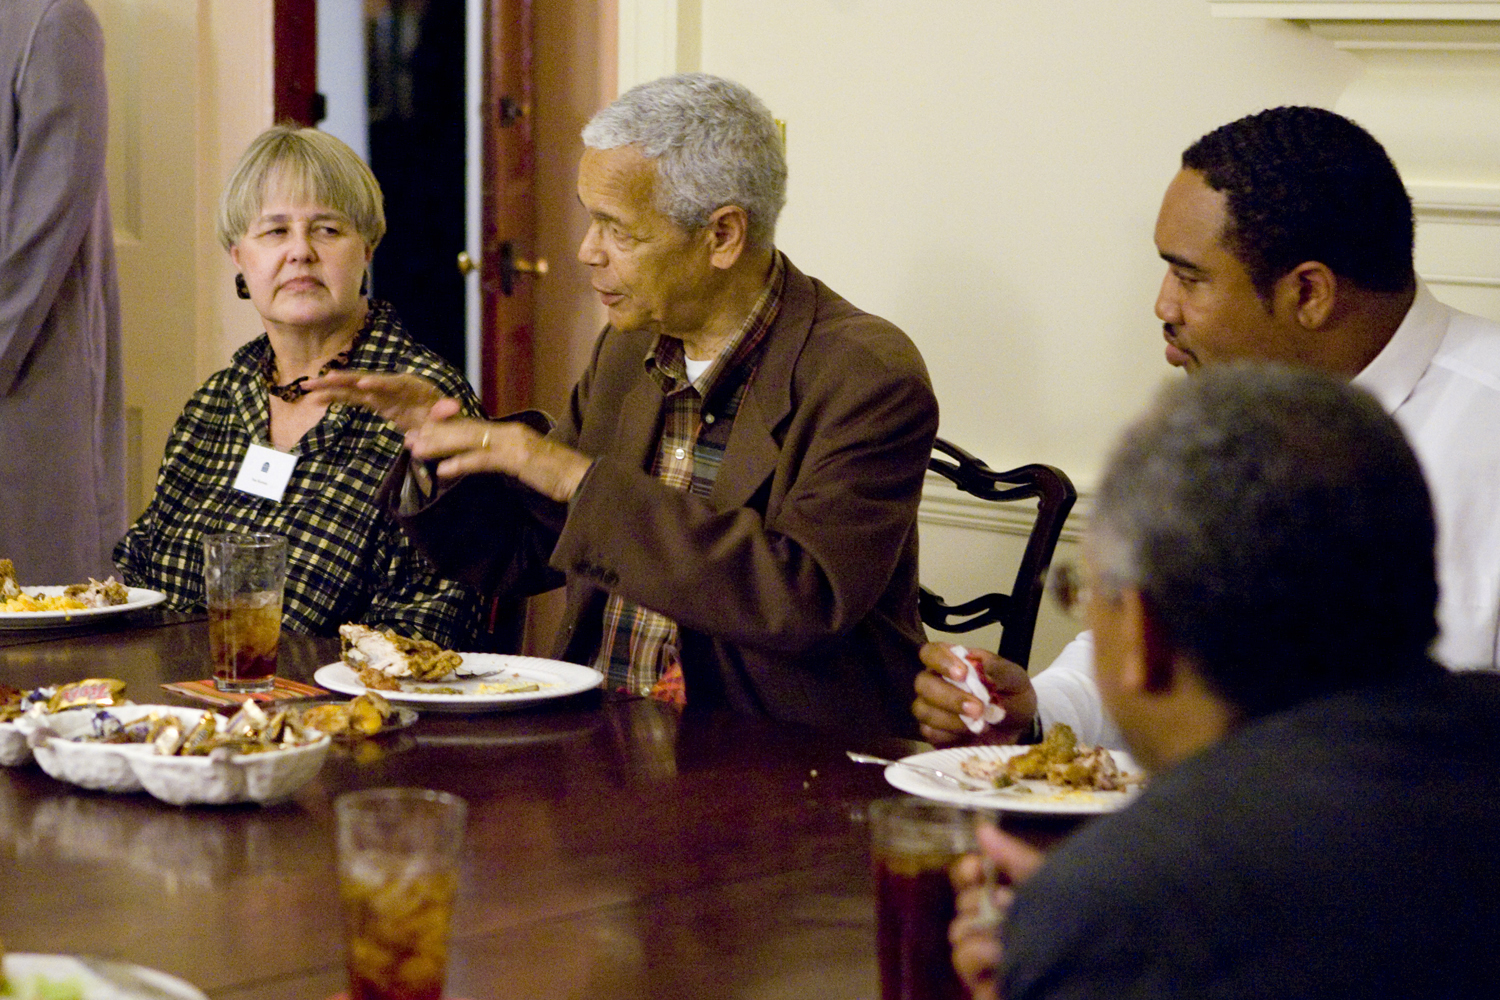 Julian Bond talking to a group of people at a dinner table